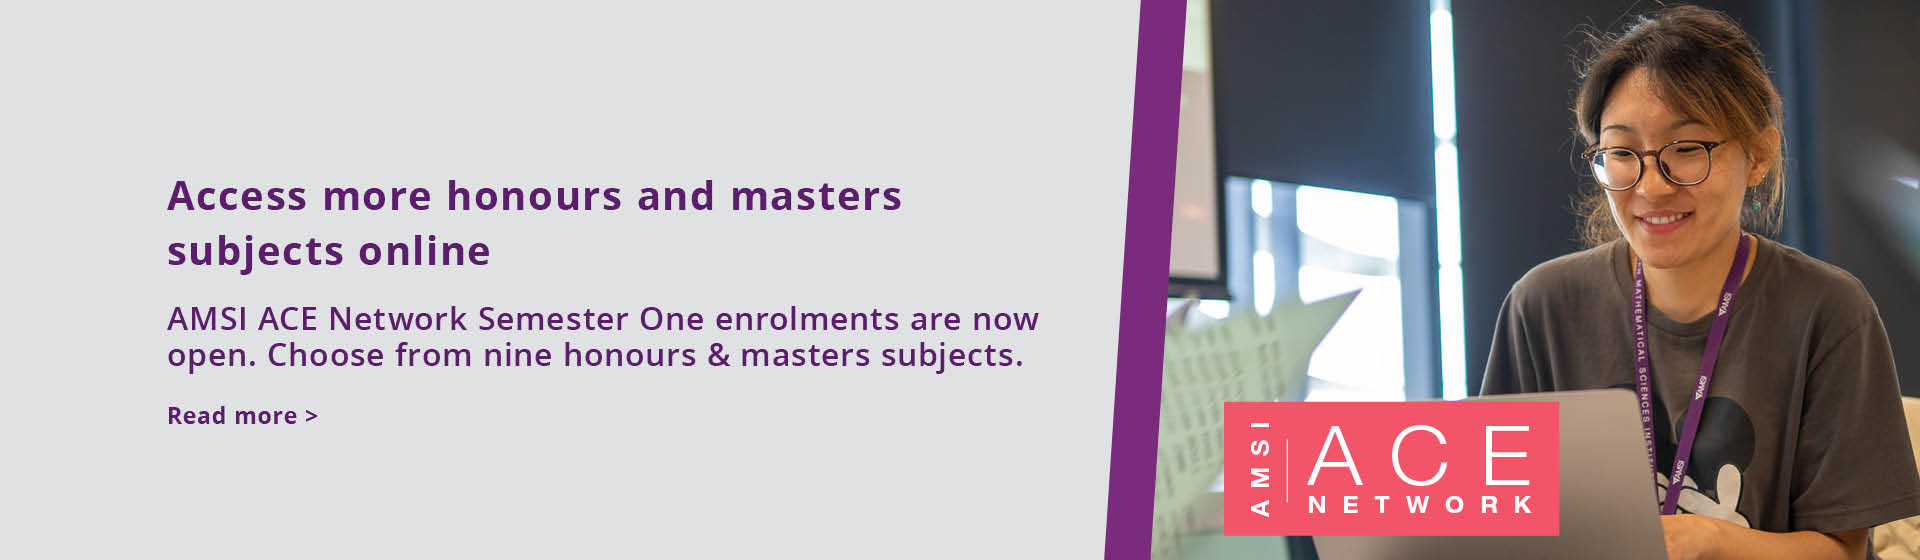 AMSI ACE Network Semester One enrolments are now open